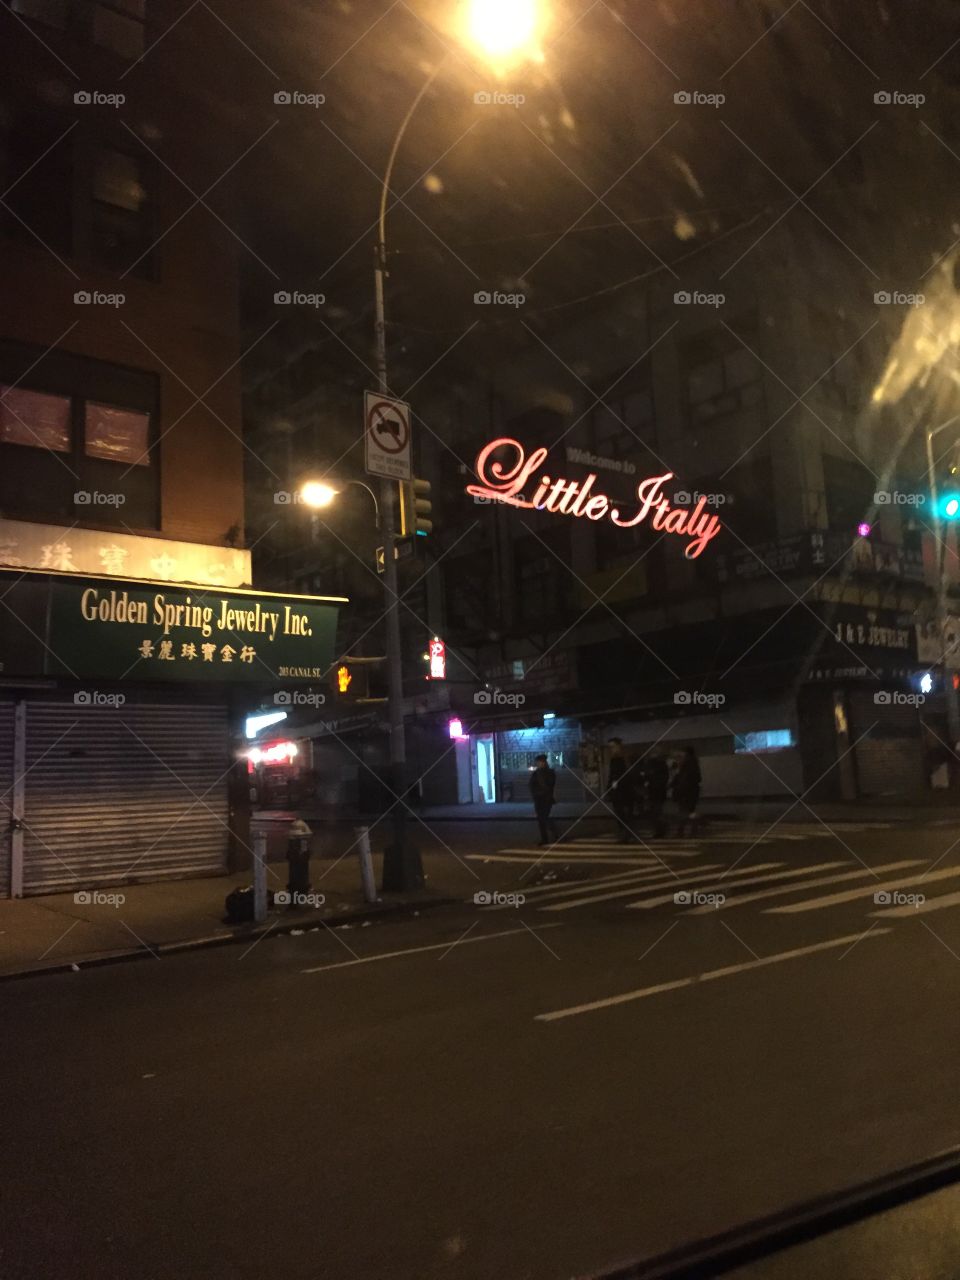 Entrance and sign to Little Italy in New York